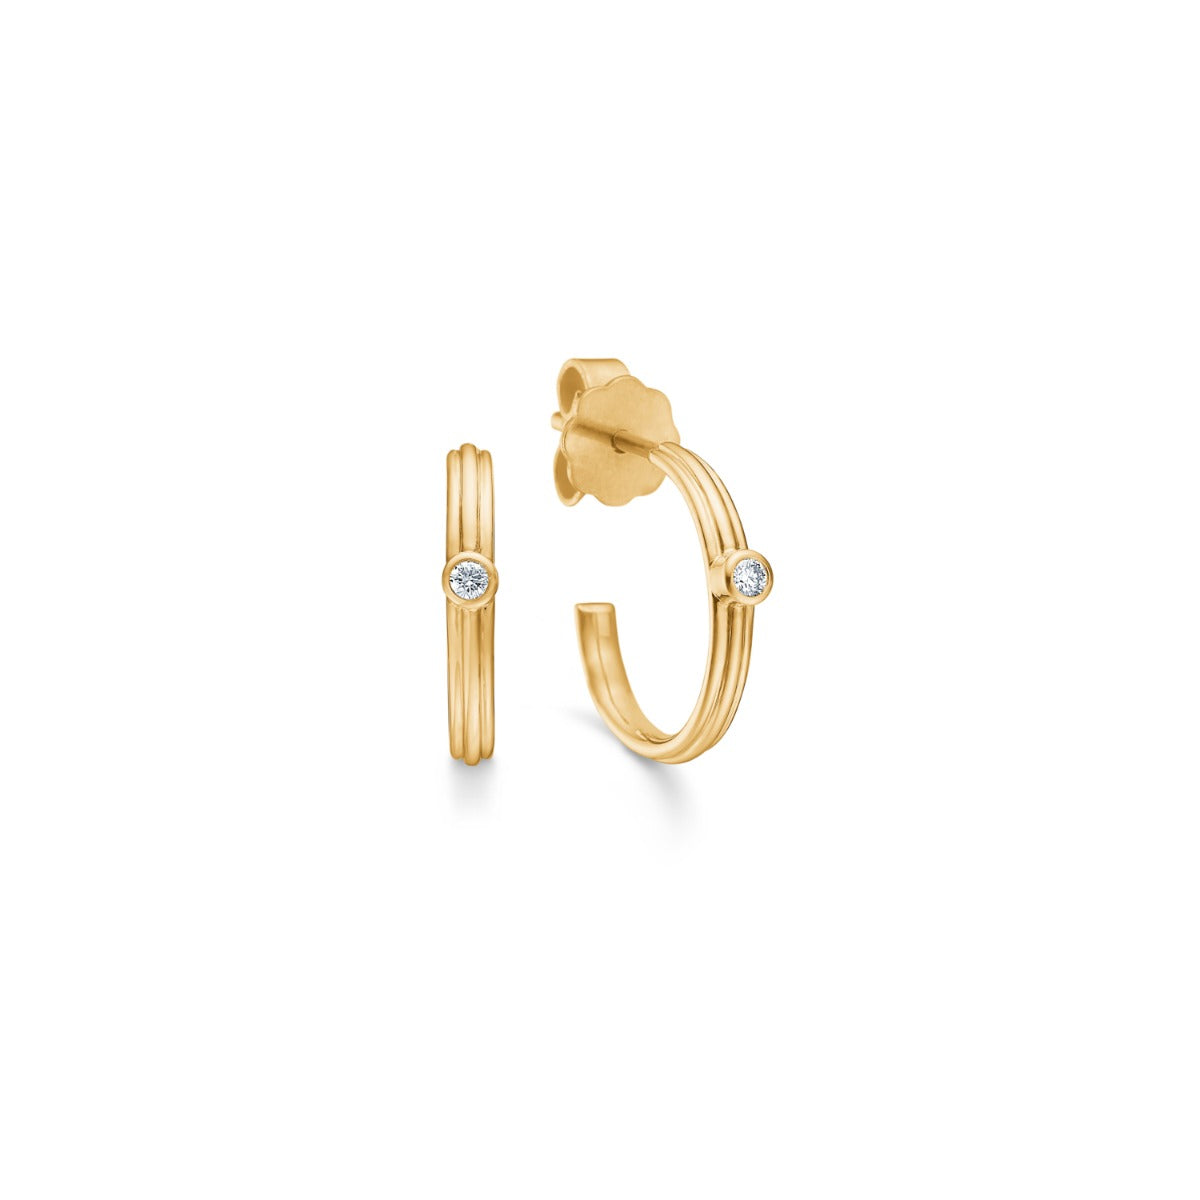 25002D04_Evolve_earring_yellow_gold_Maria_Jewelry